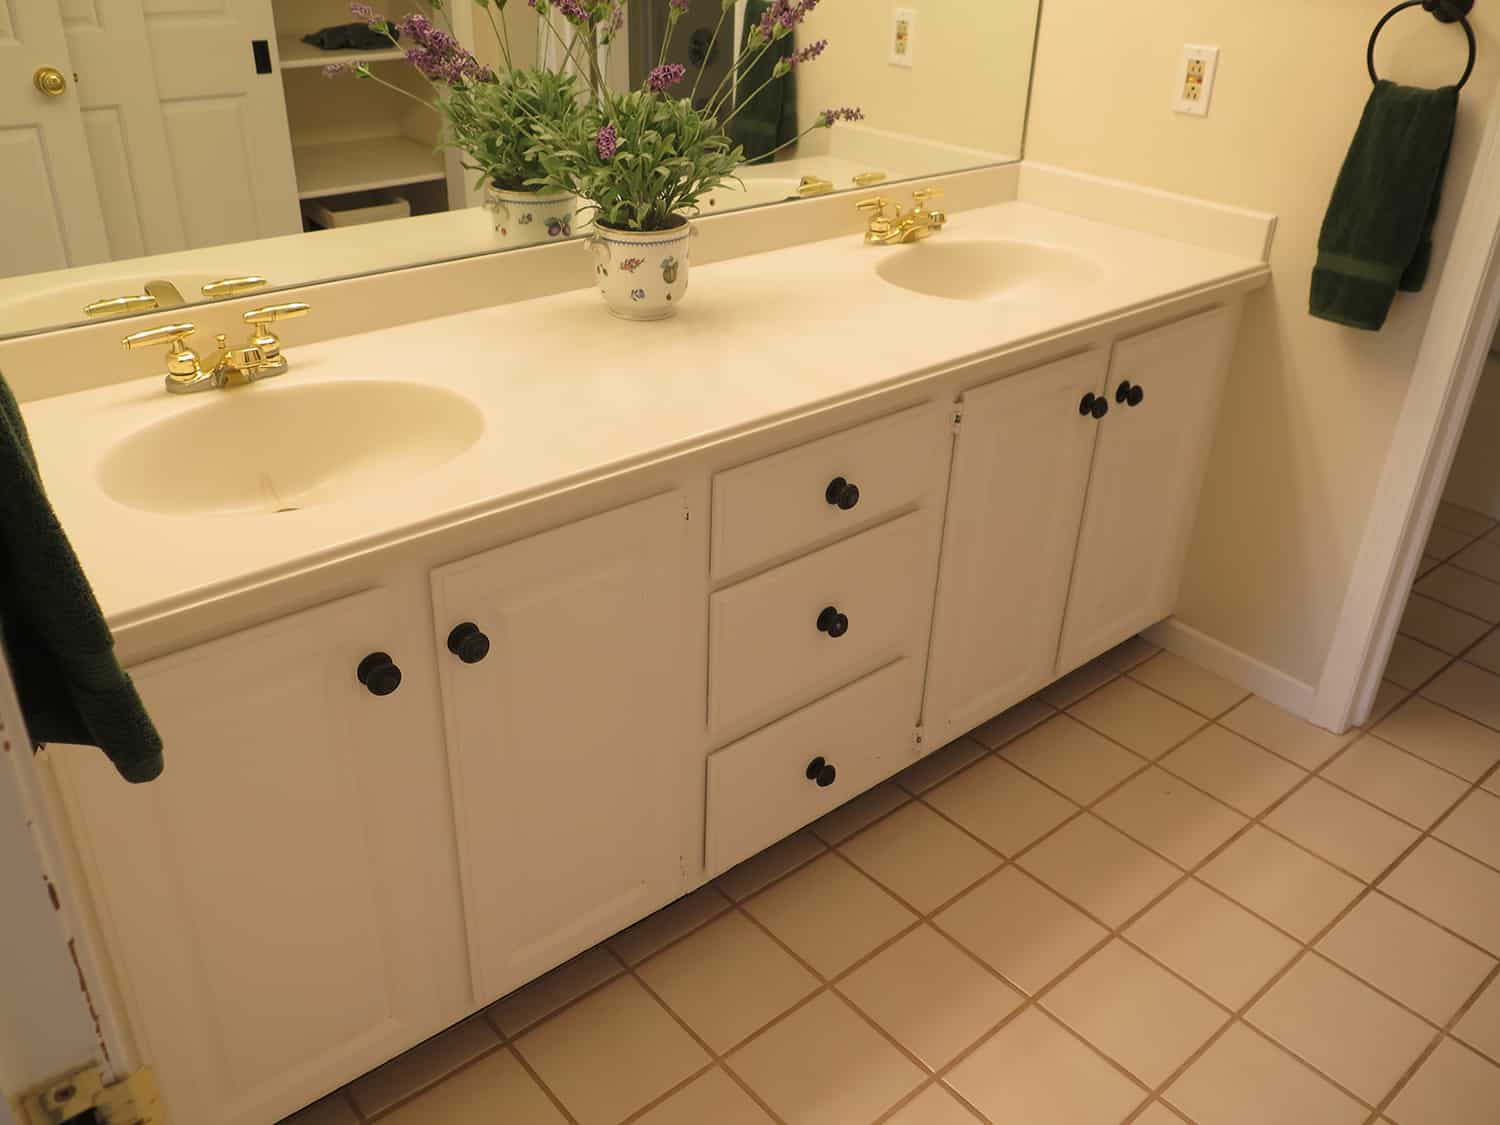 old his and her sinks with laminate countertop